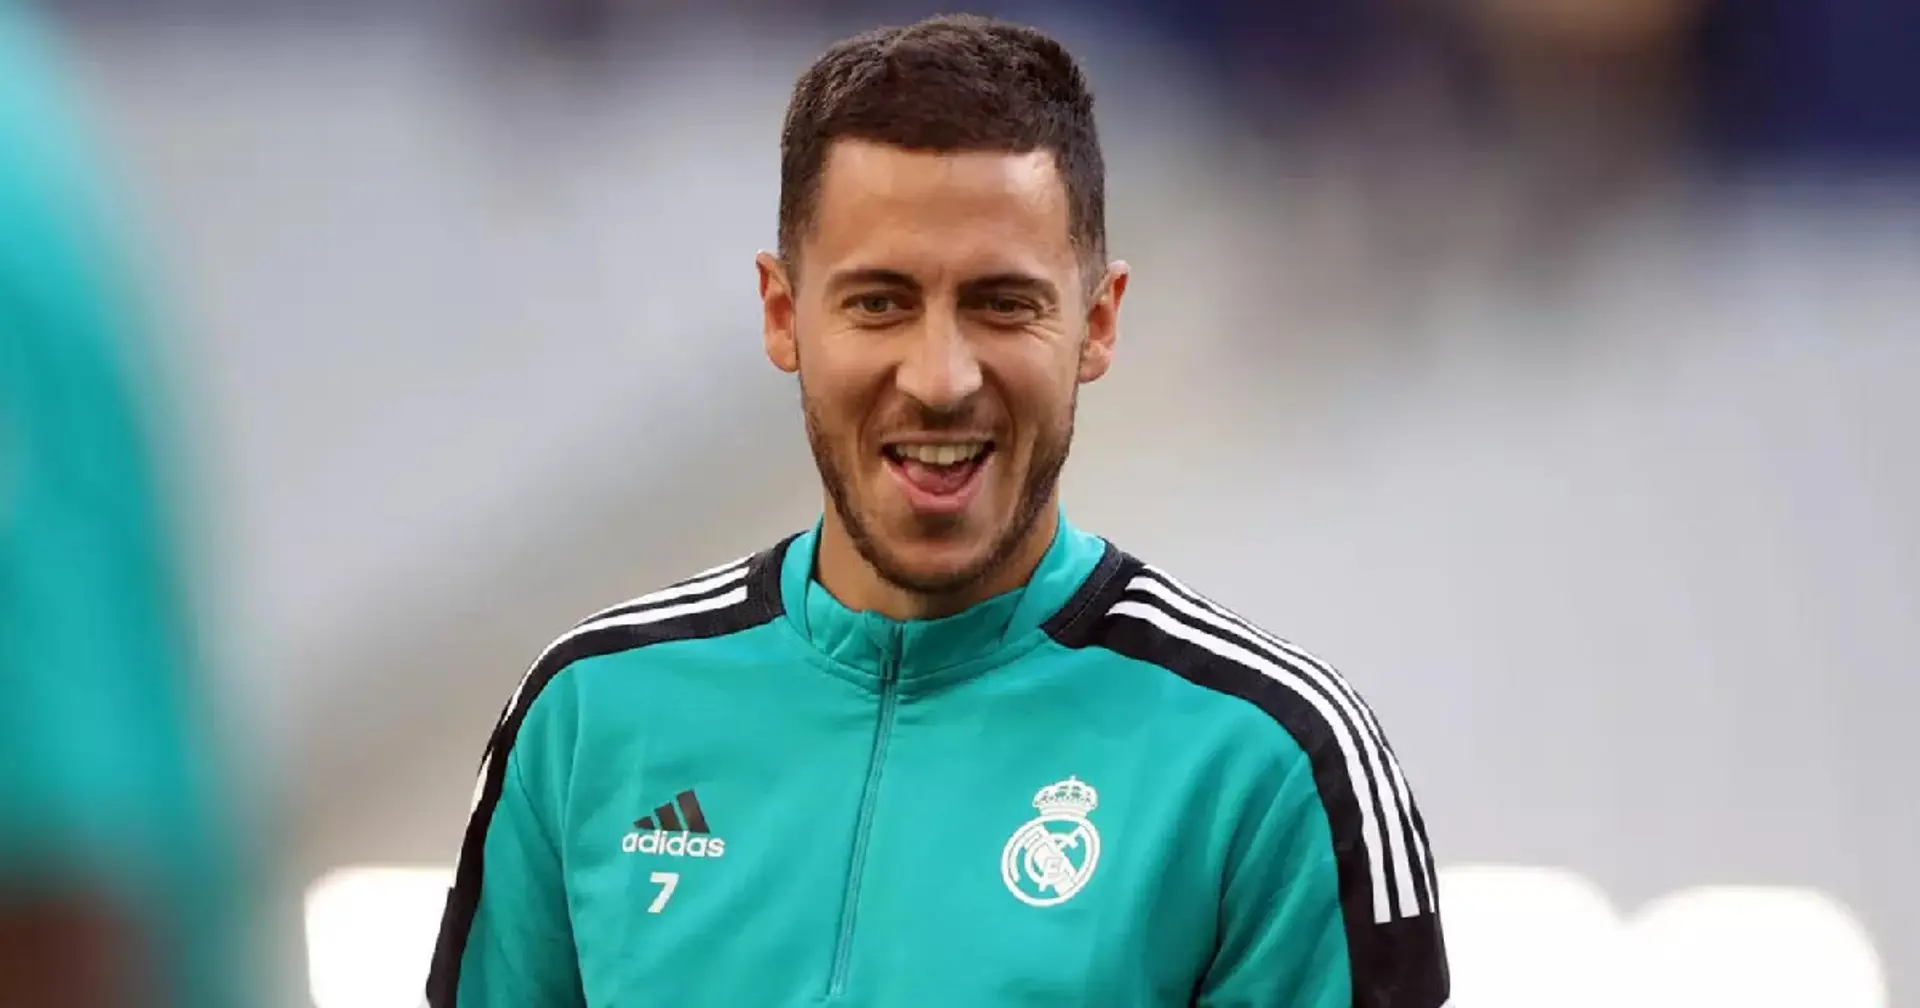 Chelsea set to make millions more from Hazard deal despite player's retirement